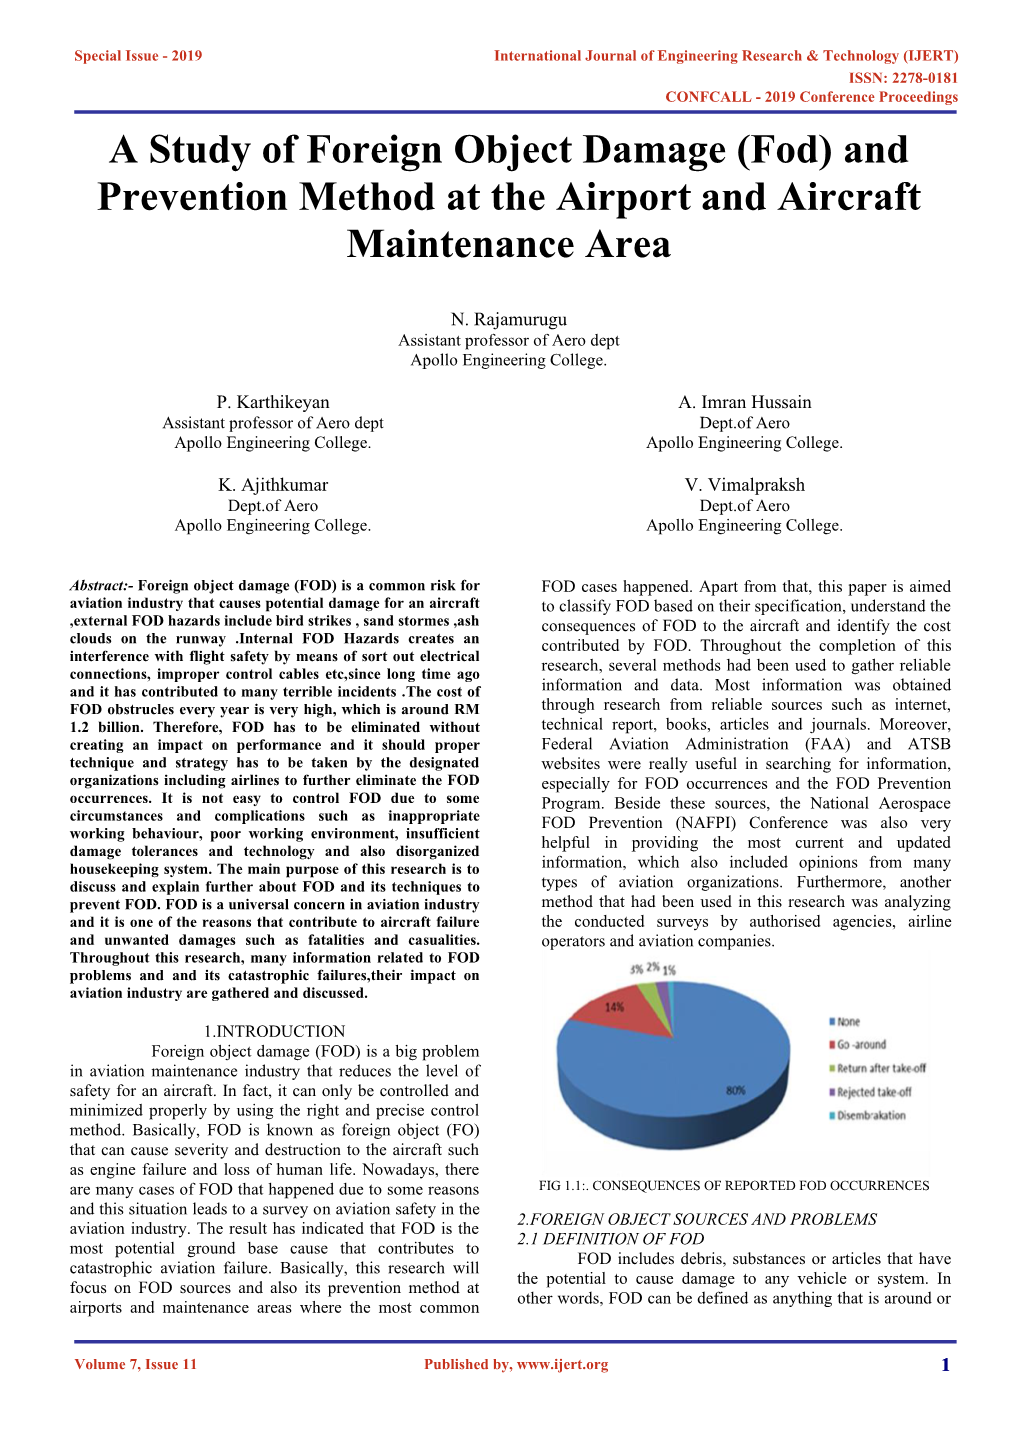 A Study of Foreign Object Damage (Fod) and Prevention Method at the Airport and Aircraft Maintenance Area